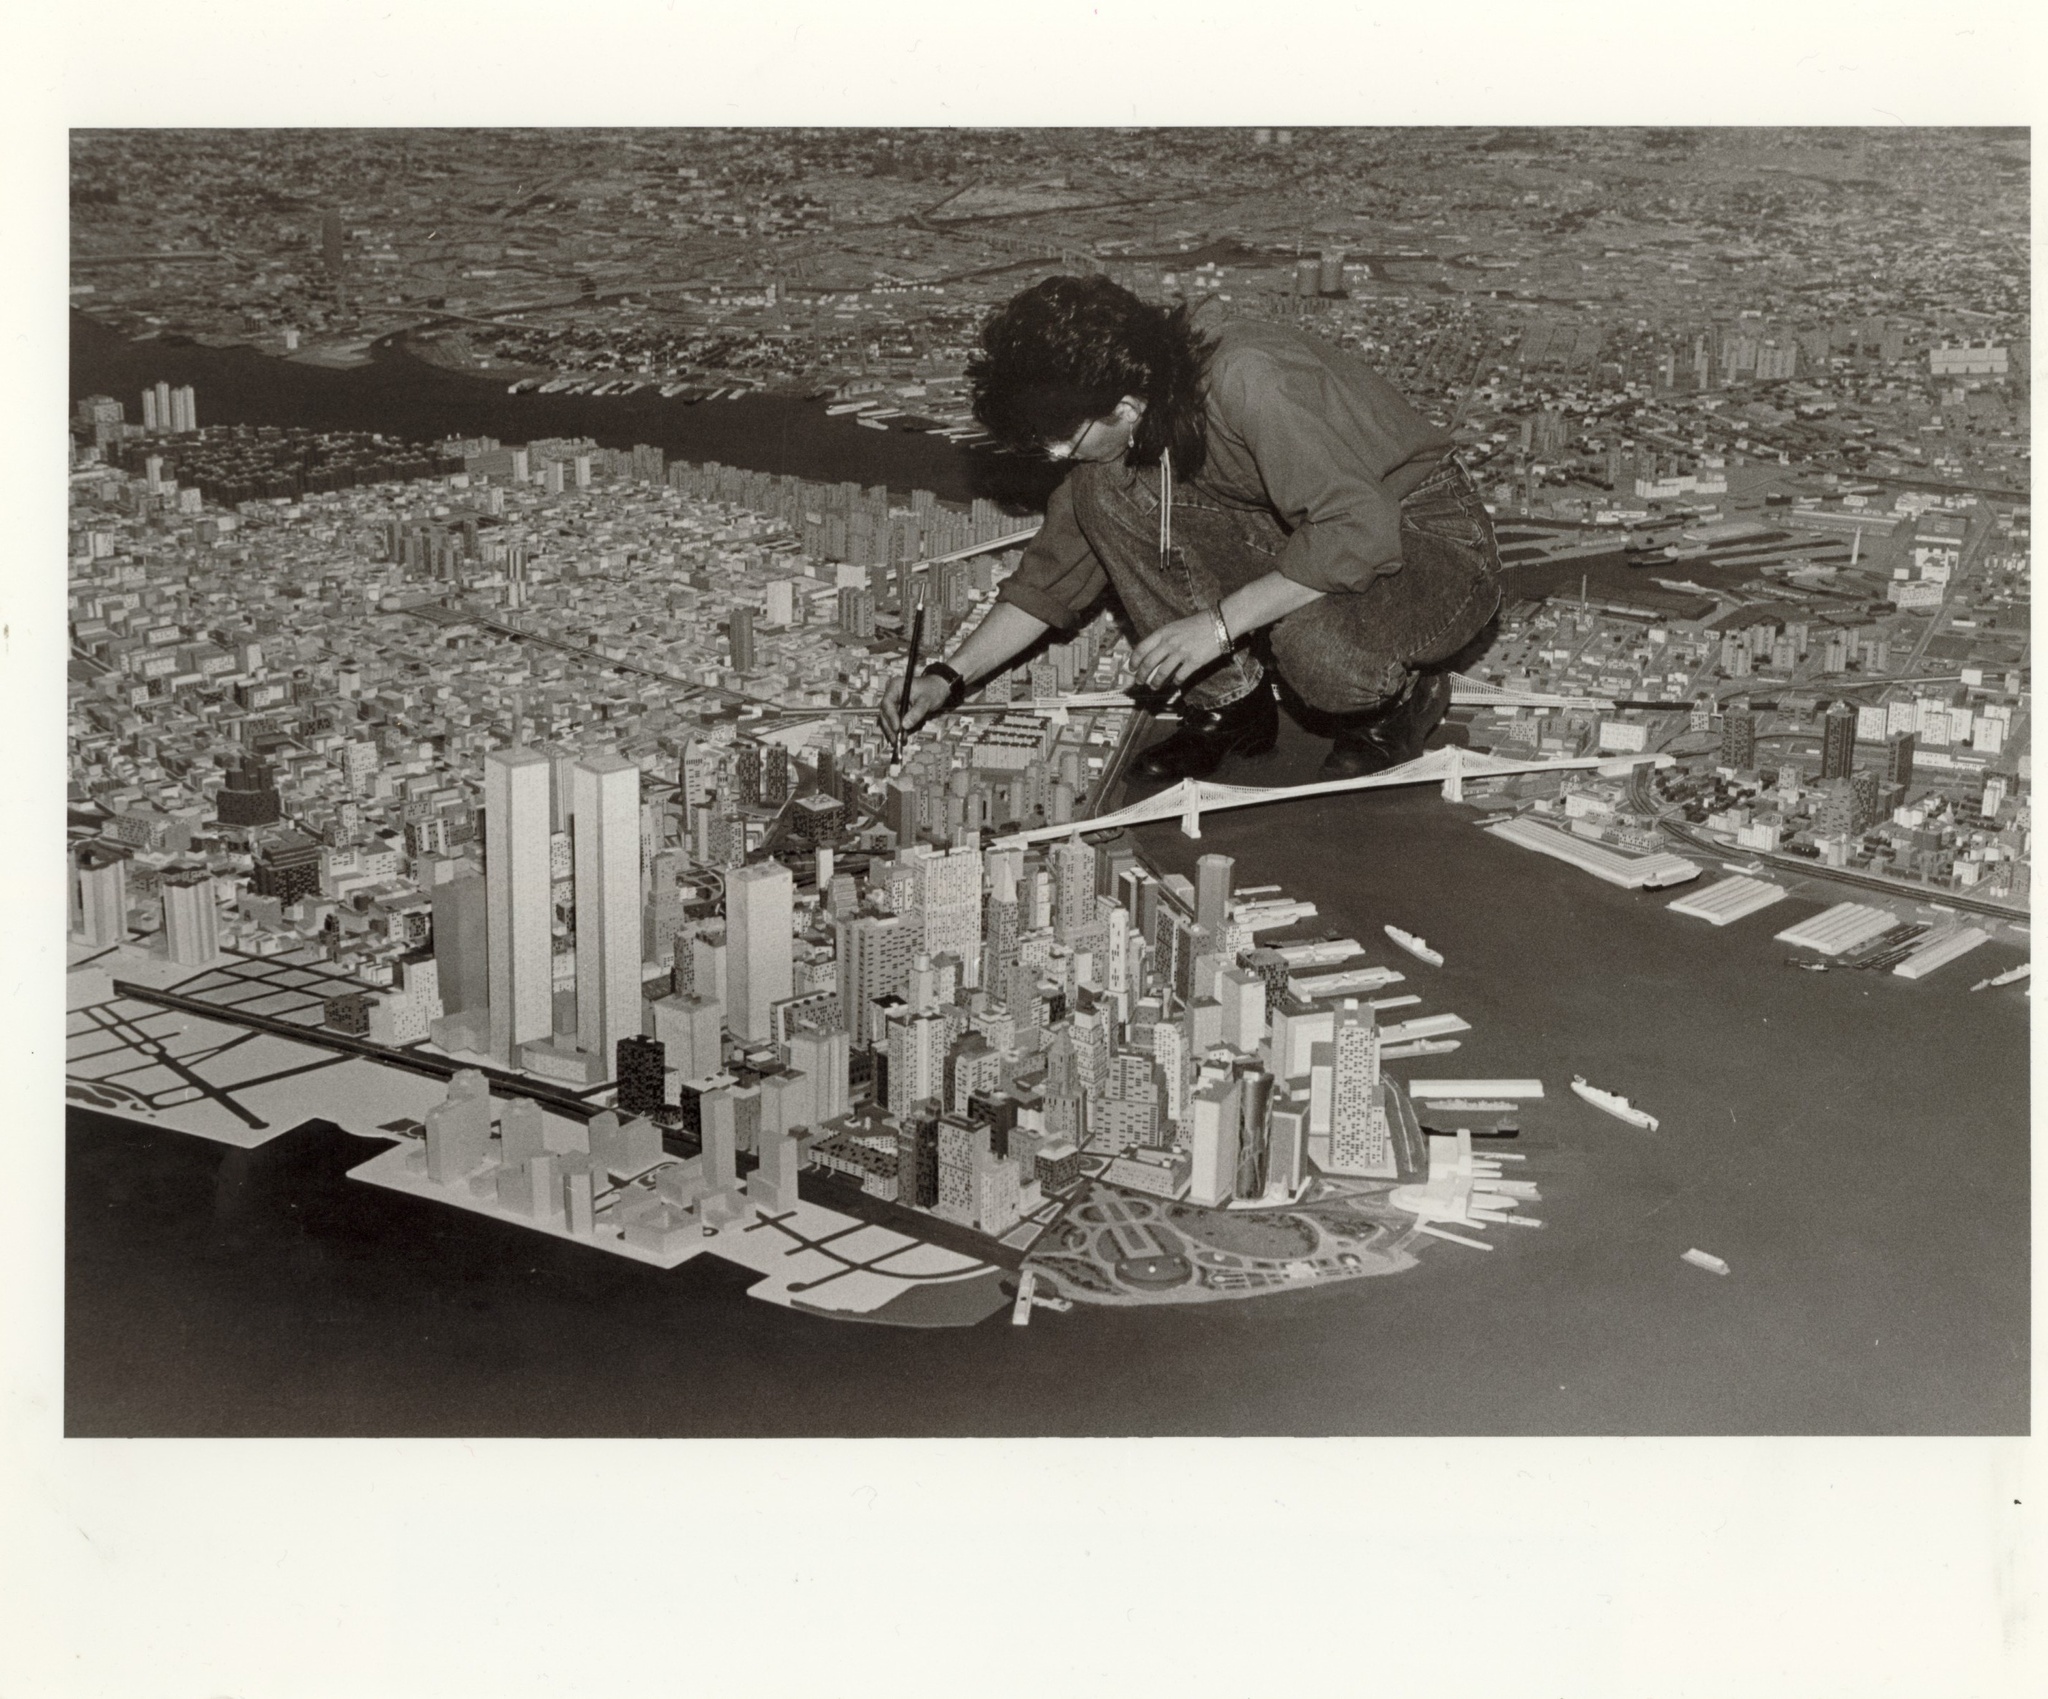 A person crouches atop the section of the Panorama of the City of New York that represents the East River, hunched over making repairs to the model buildings that make up Manhattan.